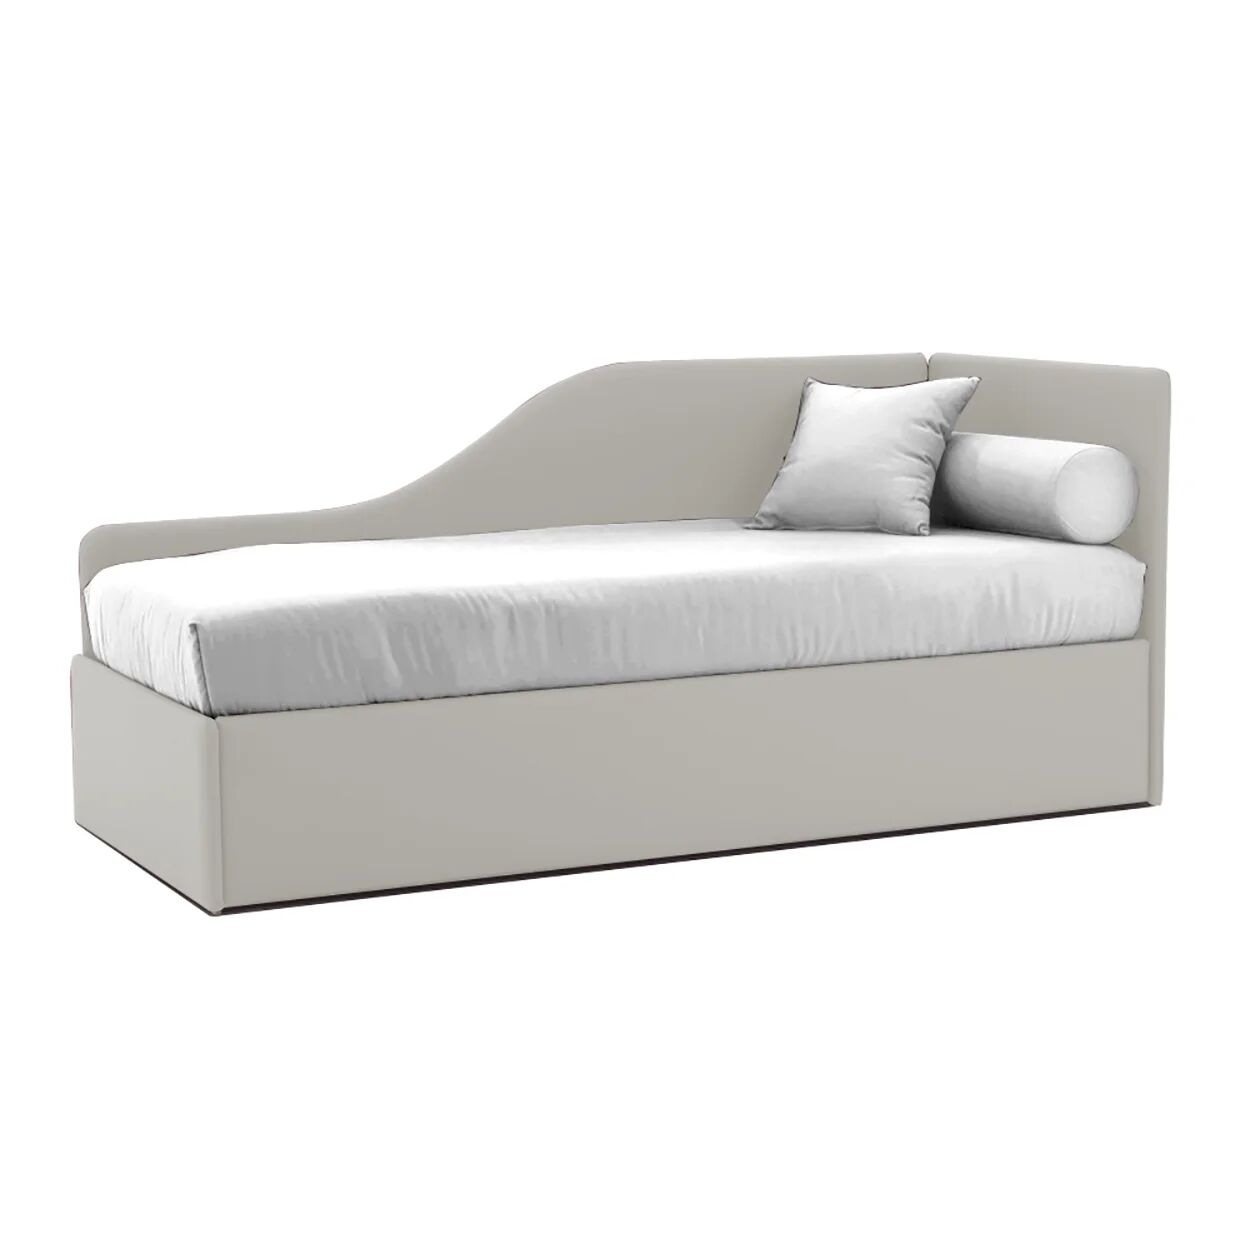 Let it Bed WHY-D-SHAPE-DX - Letto versione storage, grigio